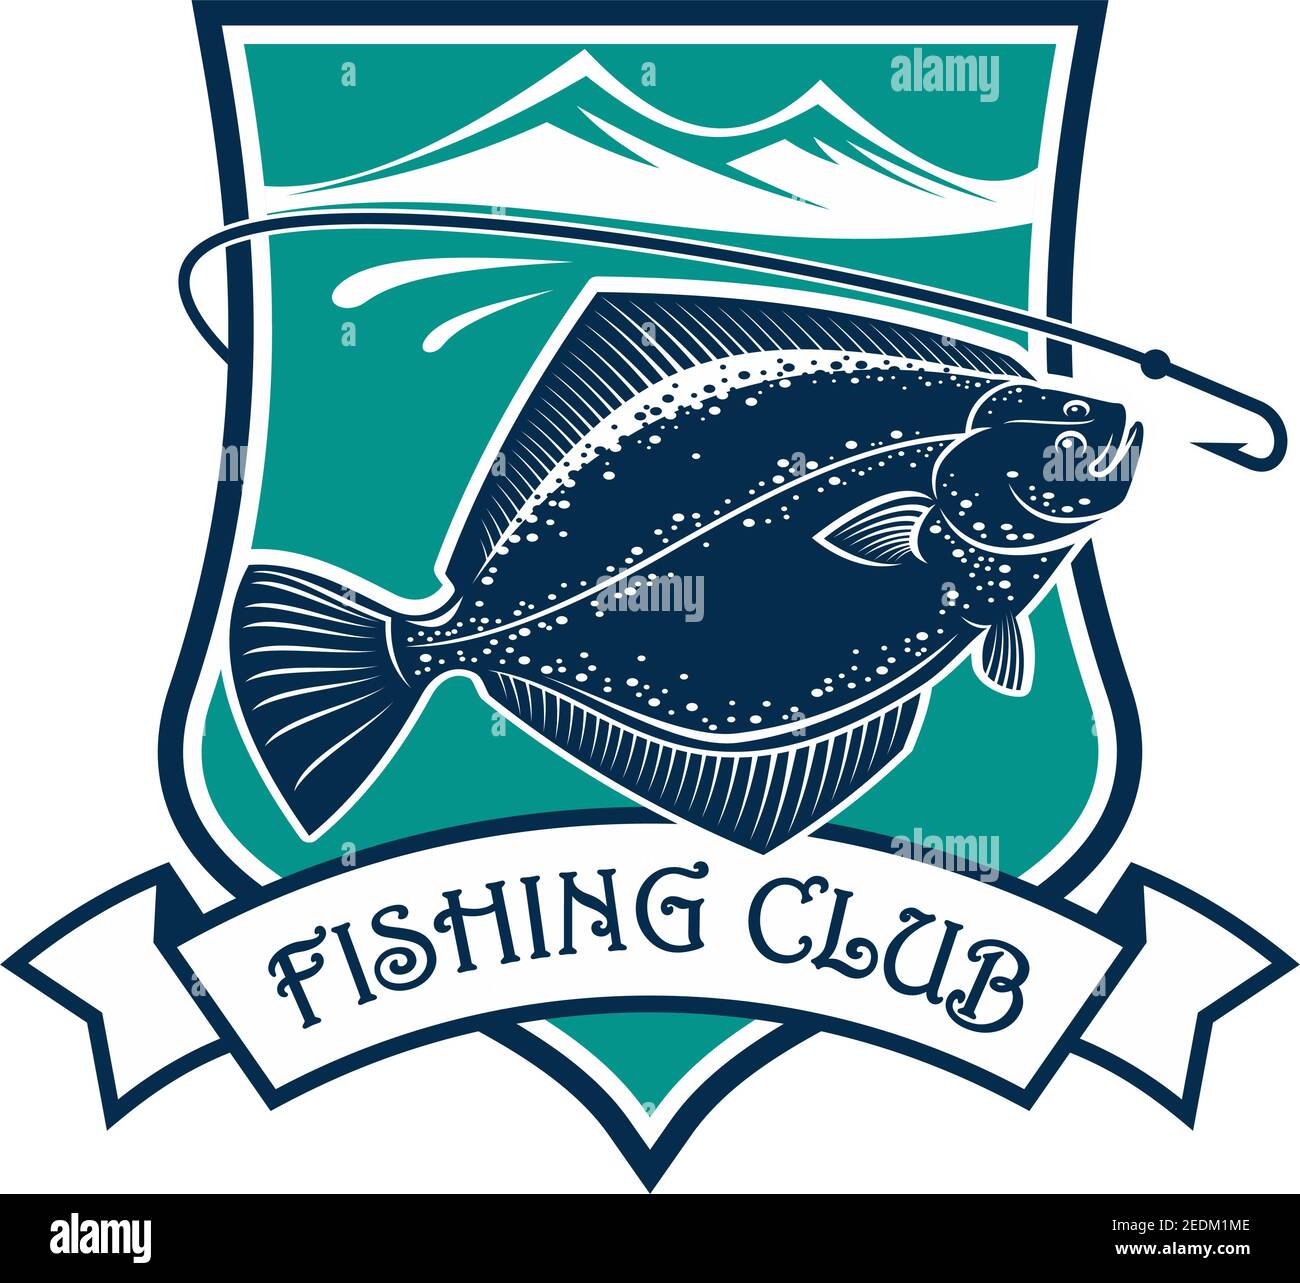 Fishing icon of flounder fish, fish-rod with bait, float and catch